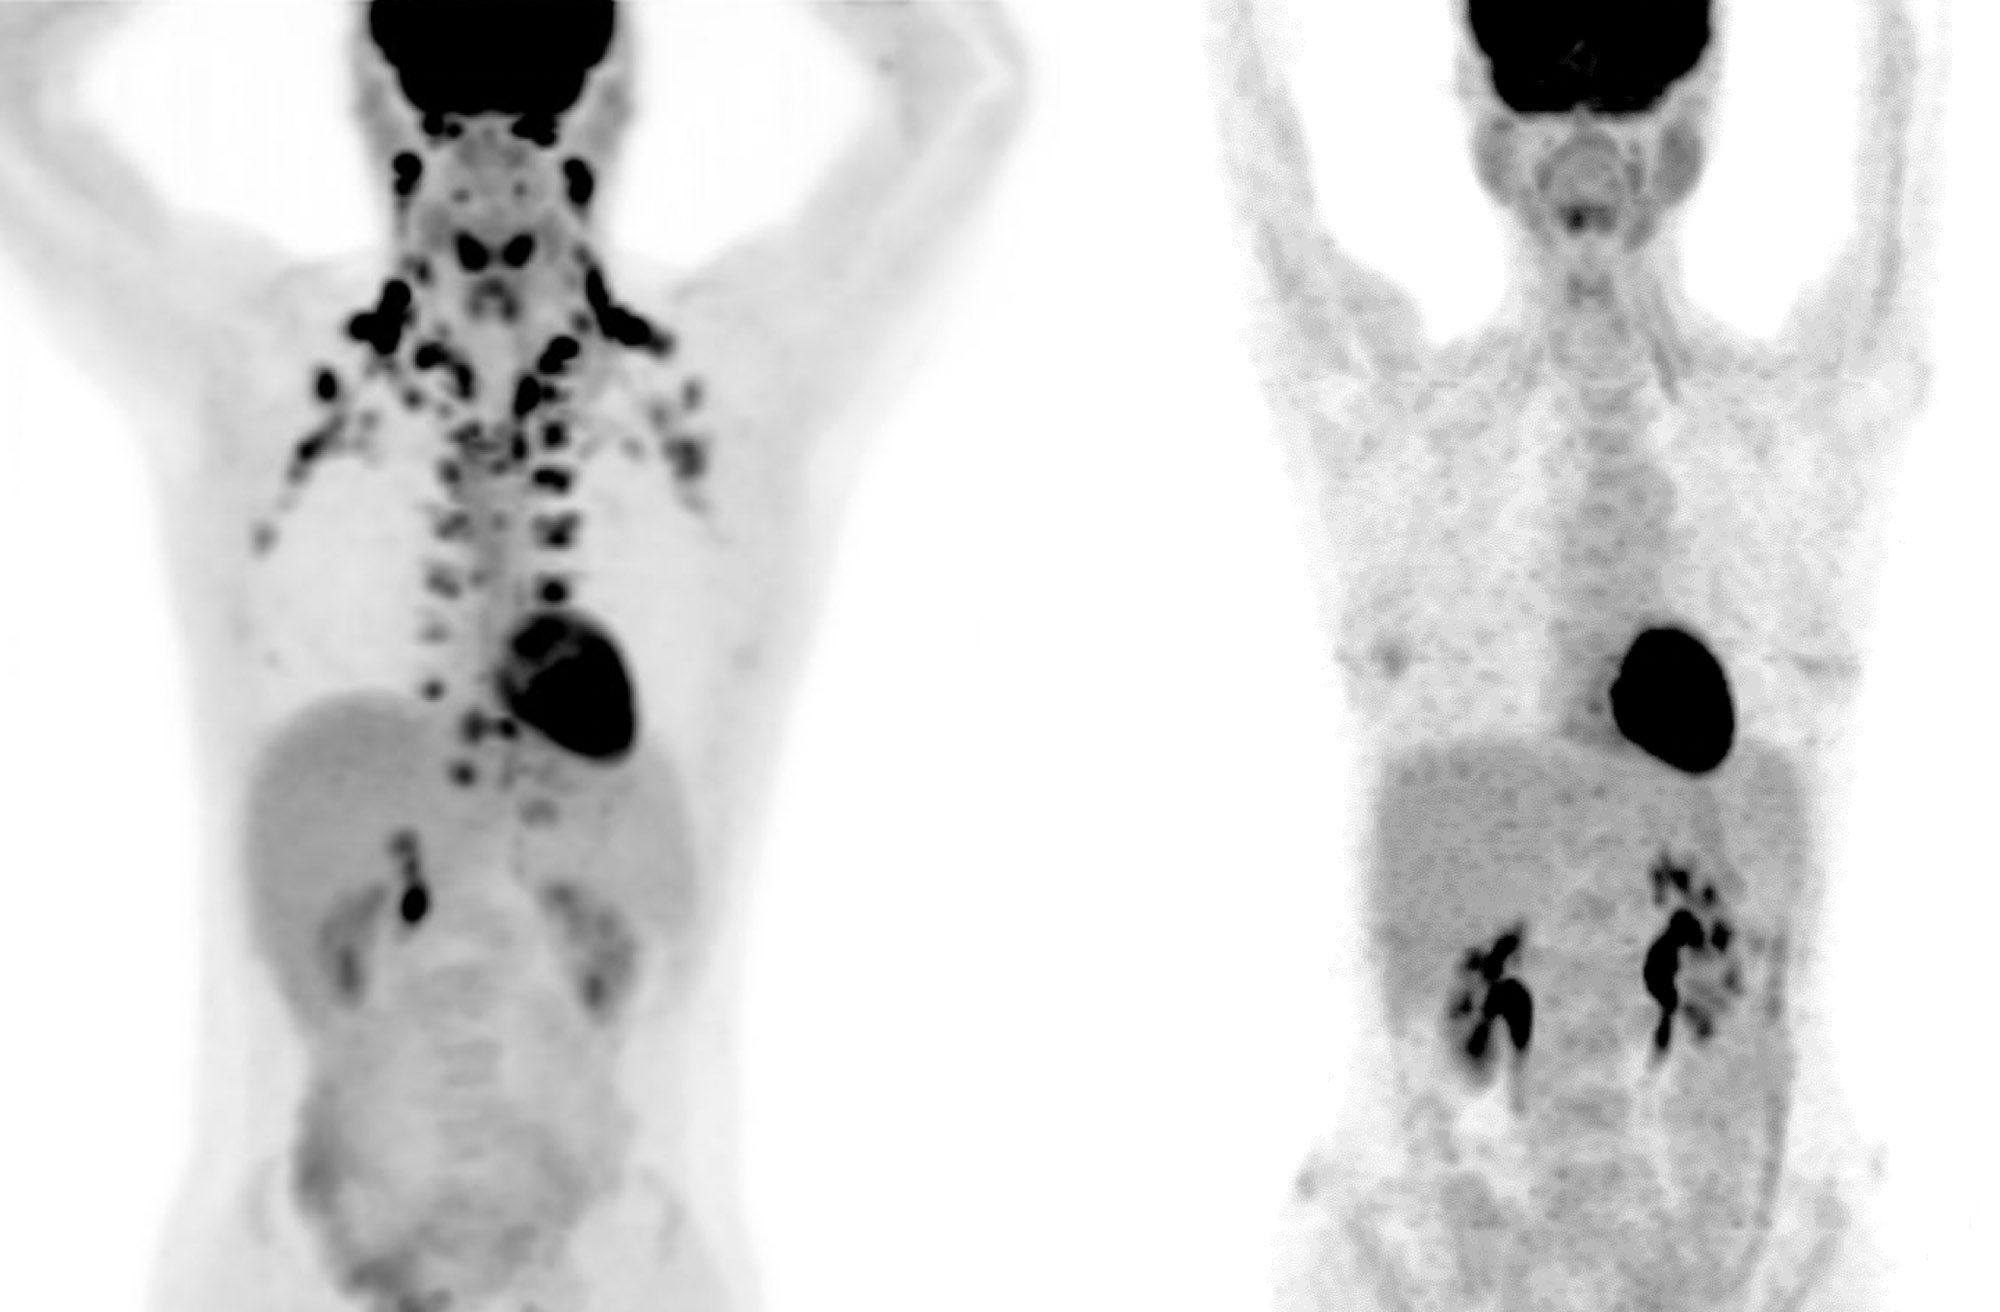 PET scans showing brown fat in two people